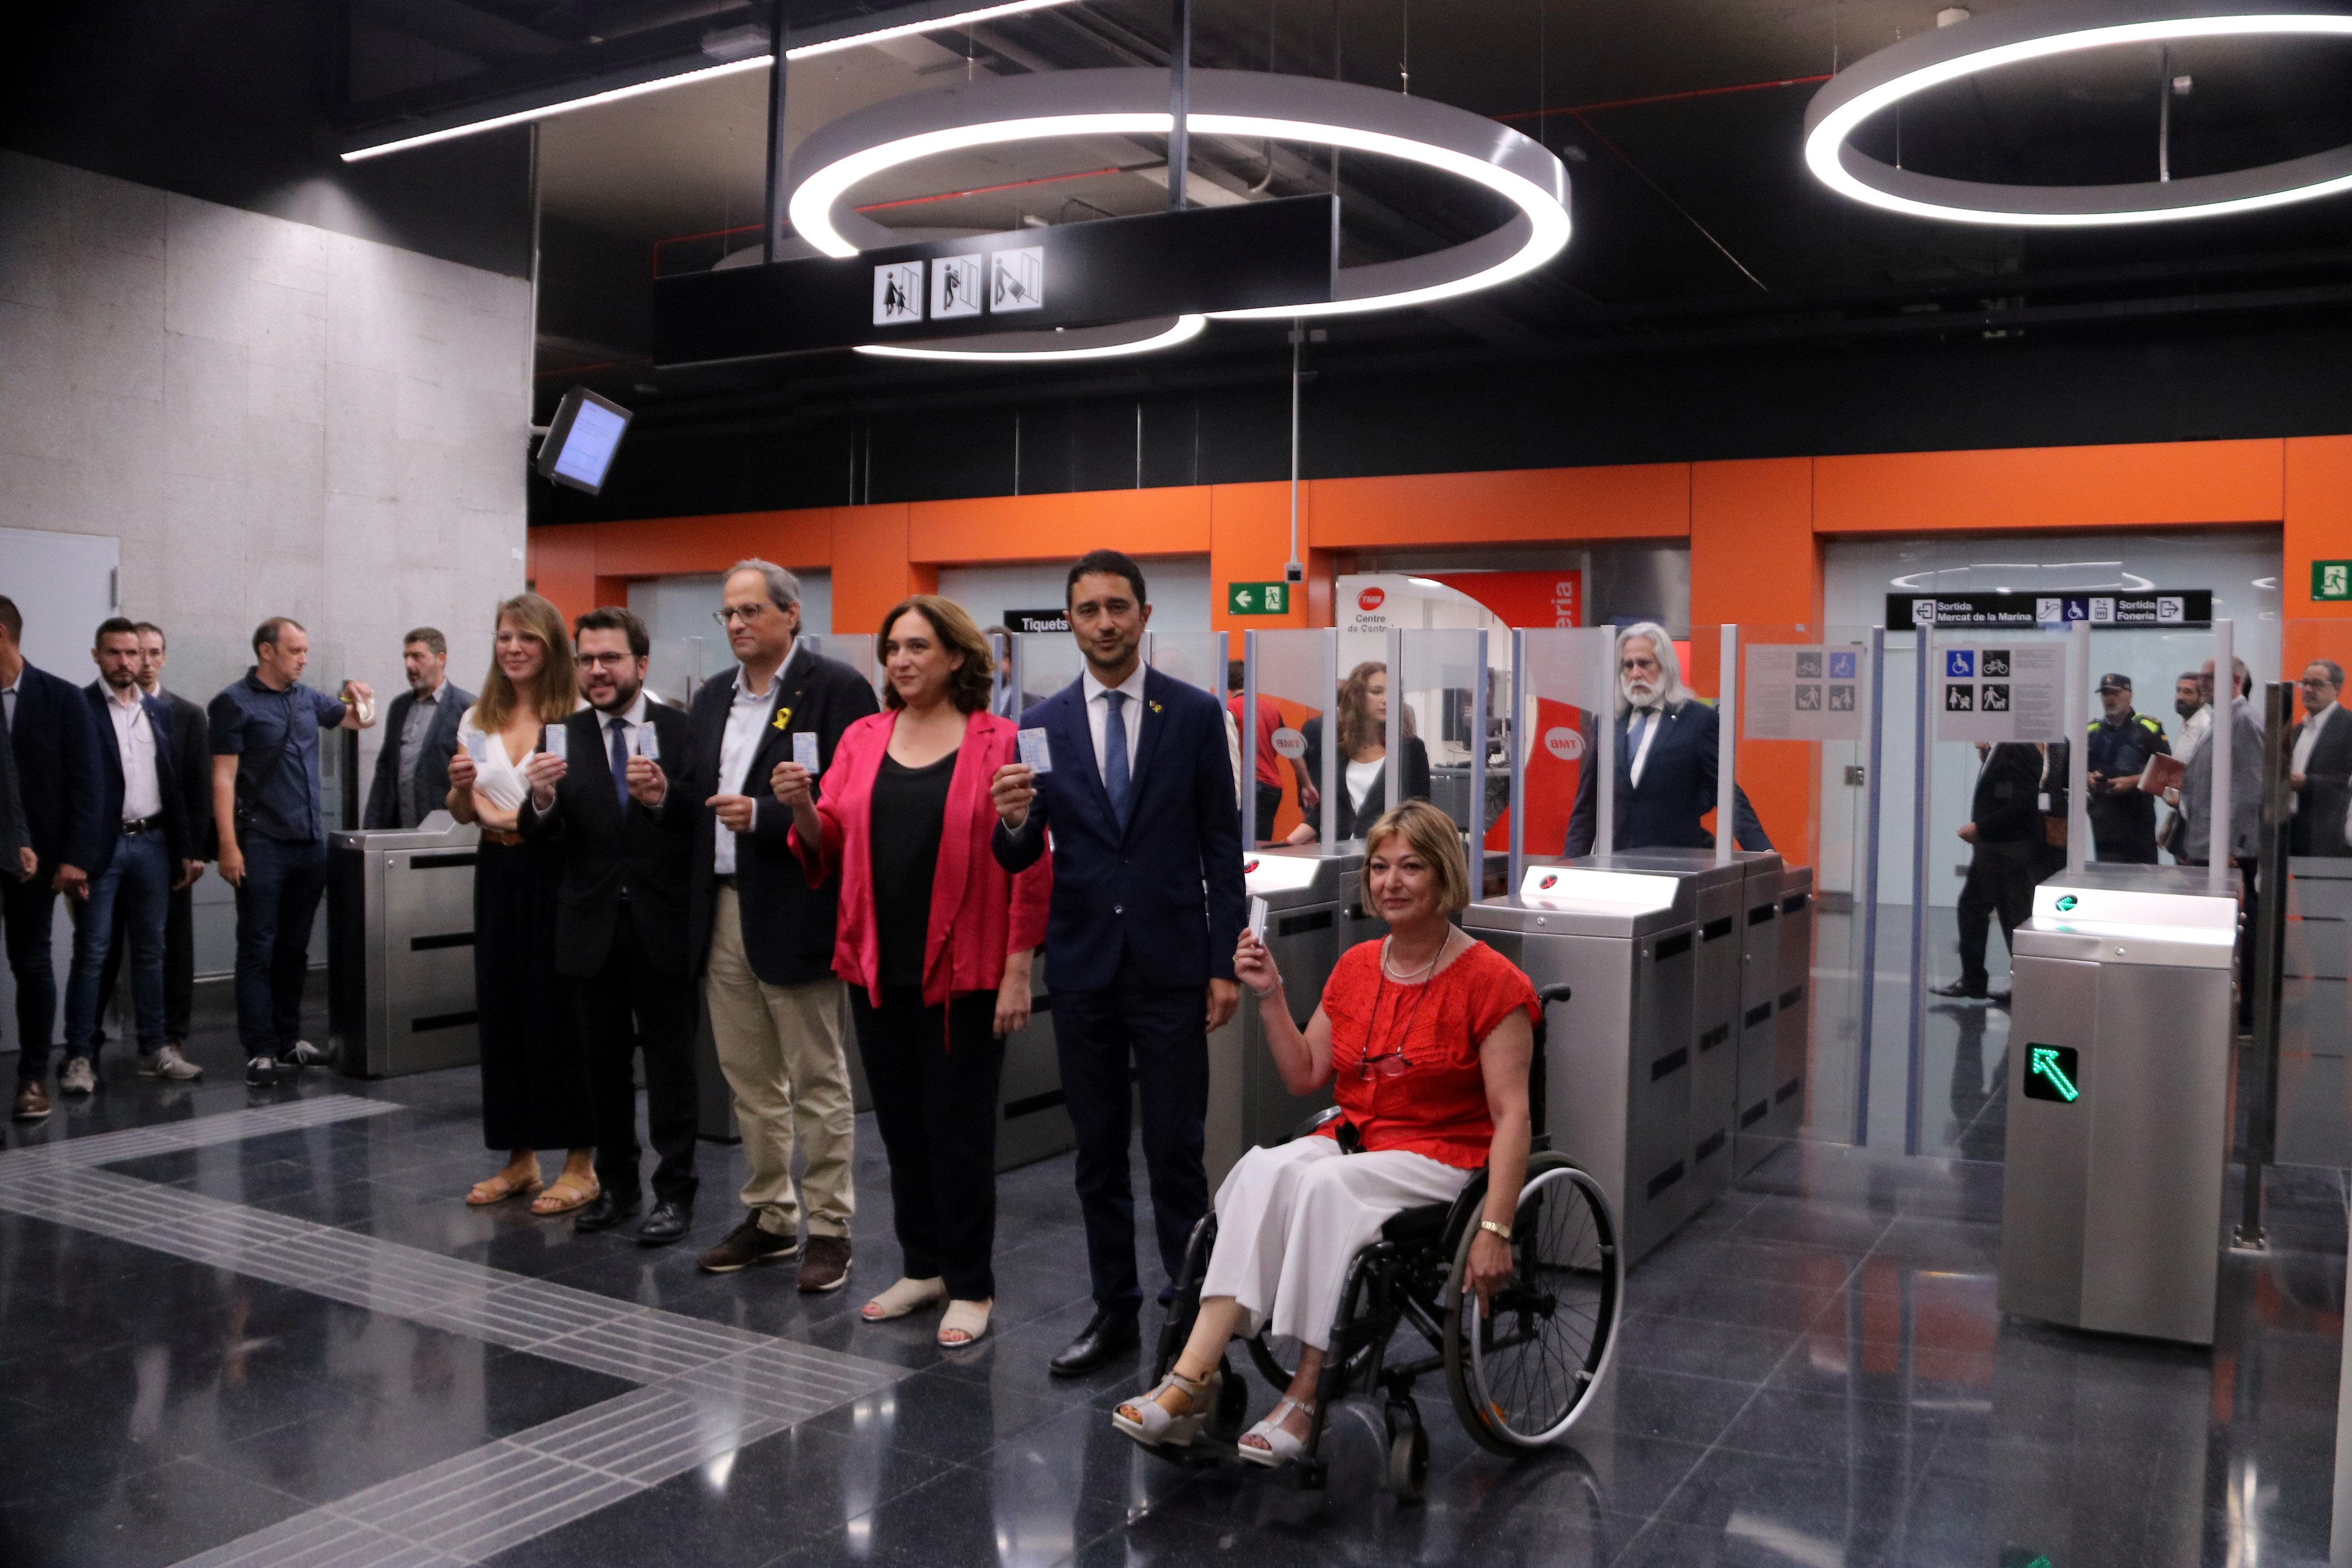 Torra calls for "fewer riot police, more infrastructures" at L10 metro opening